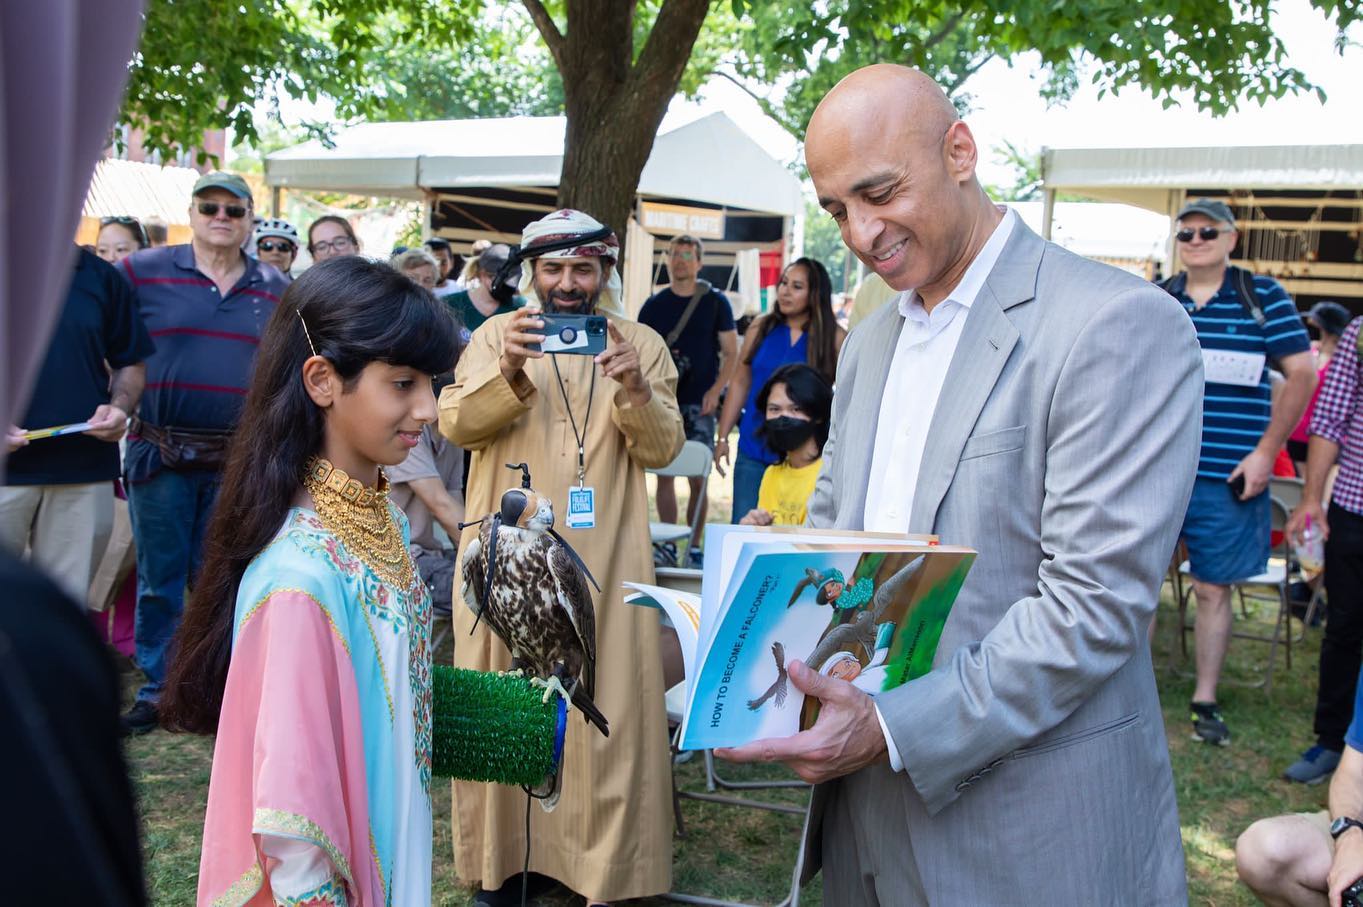 Yousef Al Otaiba meets mother-daughter falconry duo at Smithsonian Folklife Festival.